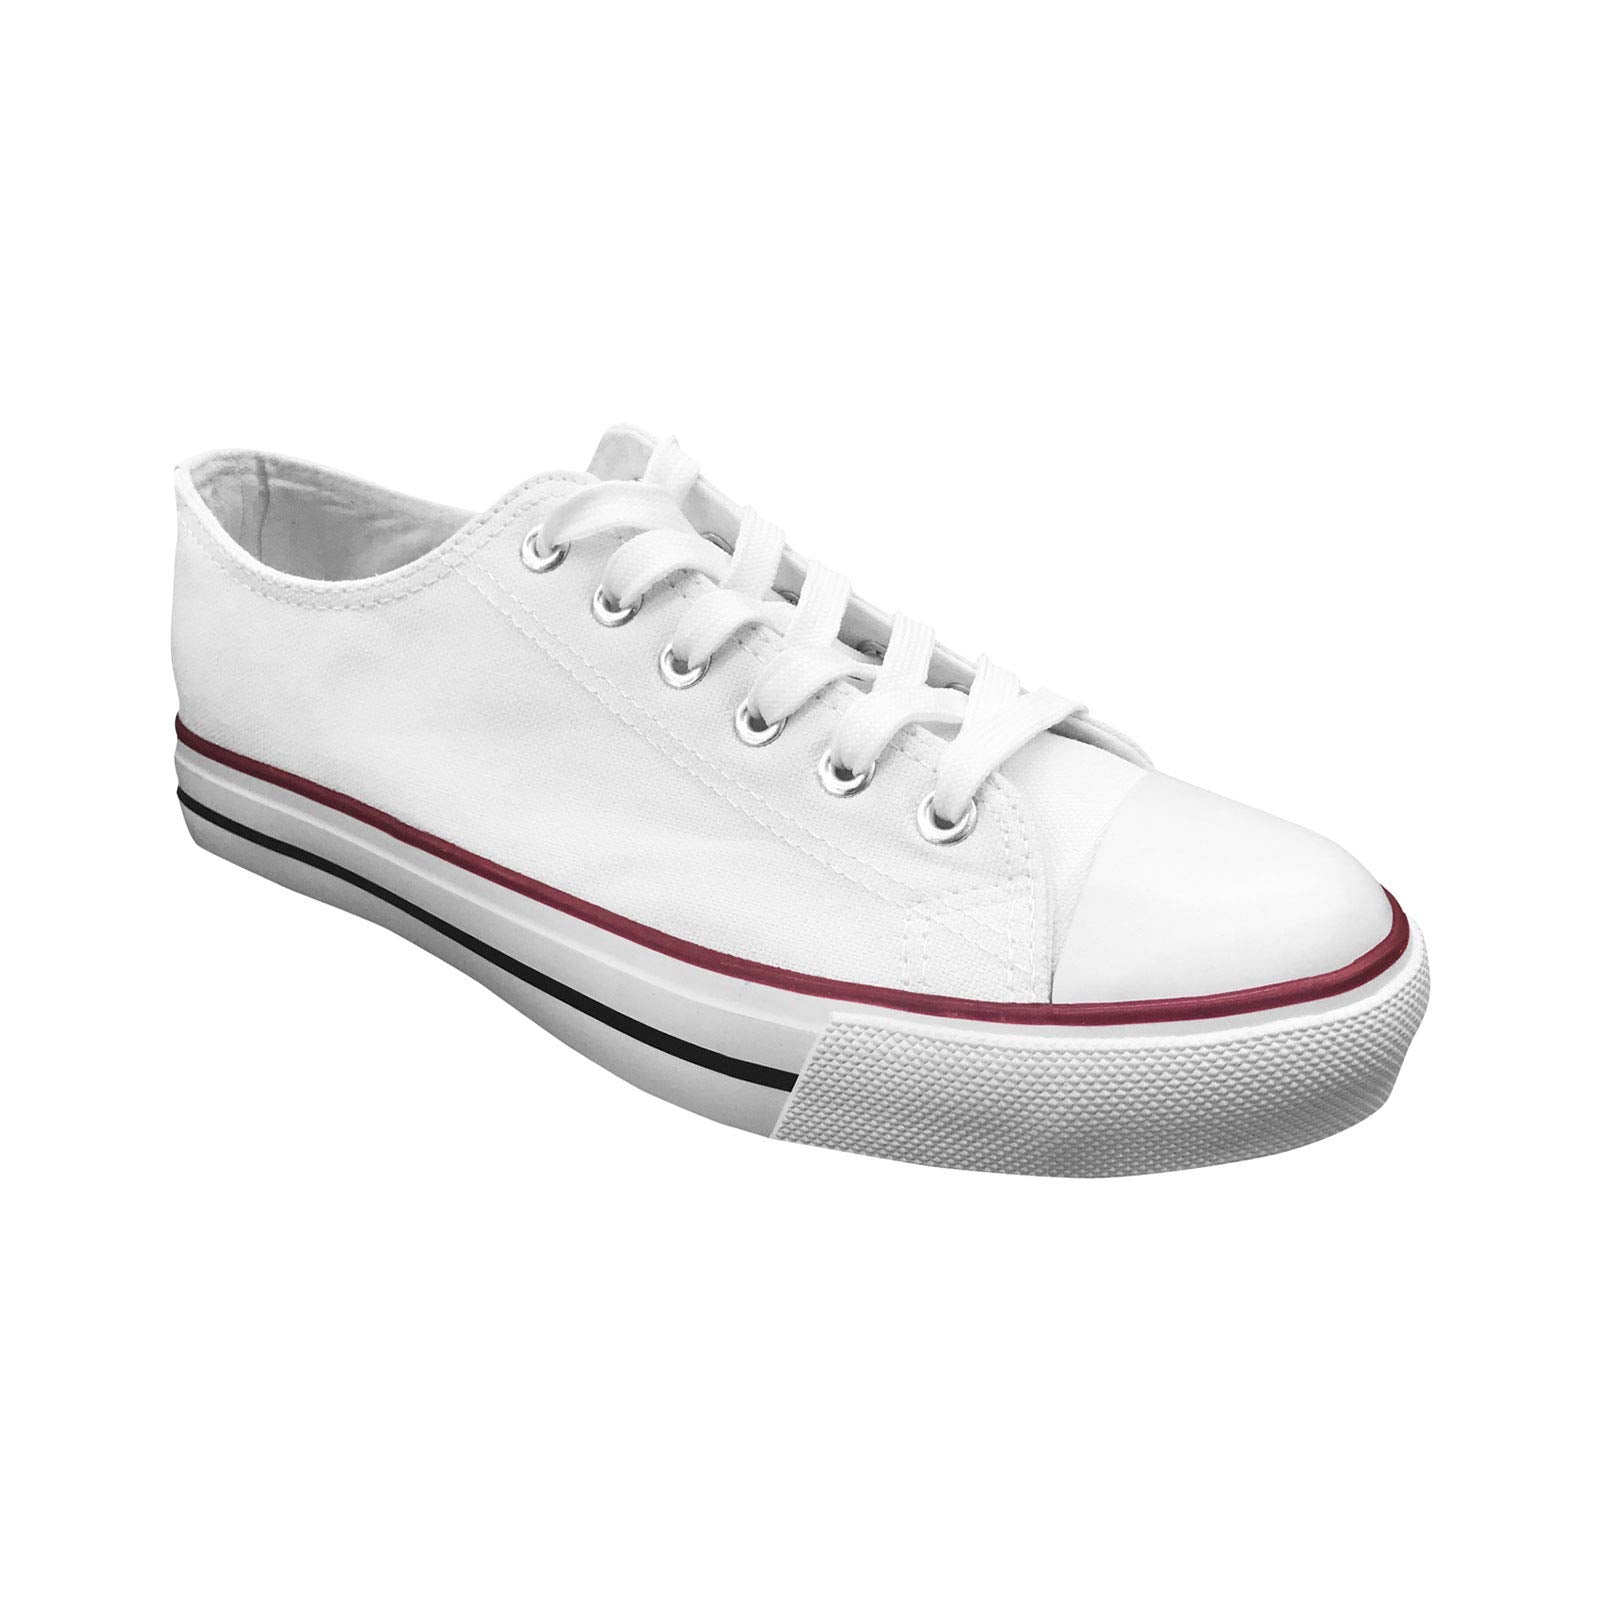 Ish Original Official Men Blank Low Top Rubber Sole Casual, White, Size 10.0 - Opticdeals